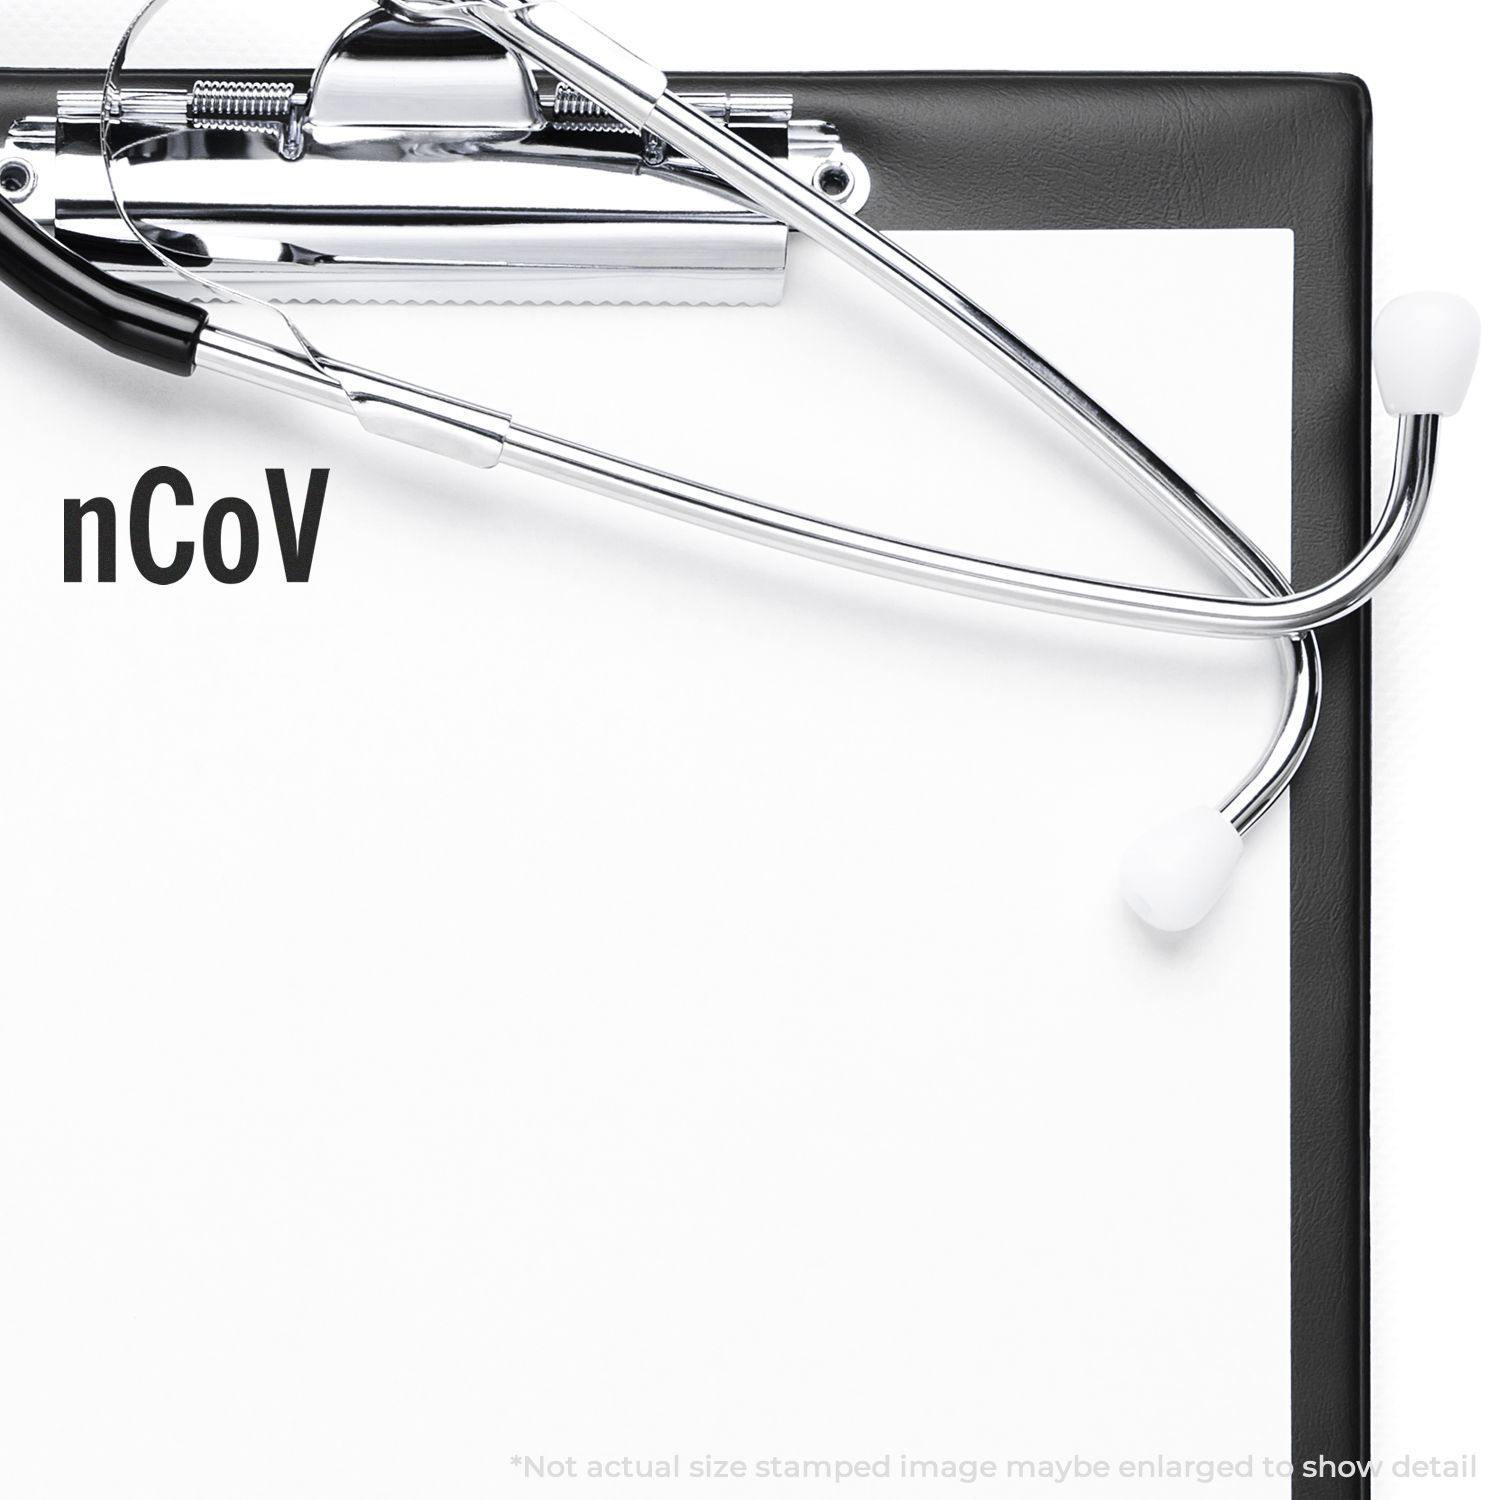 A stock office rubber stamp with a stamped image showing how the text "nCoV" in a large font is displayed after stamping.